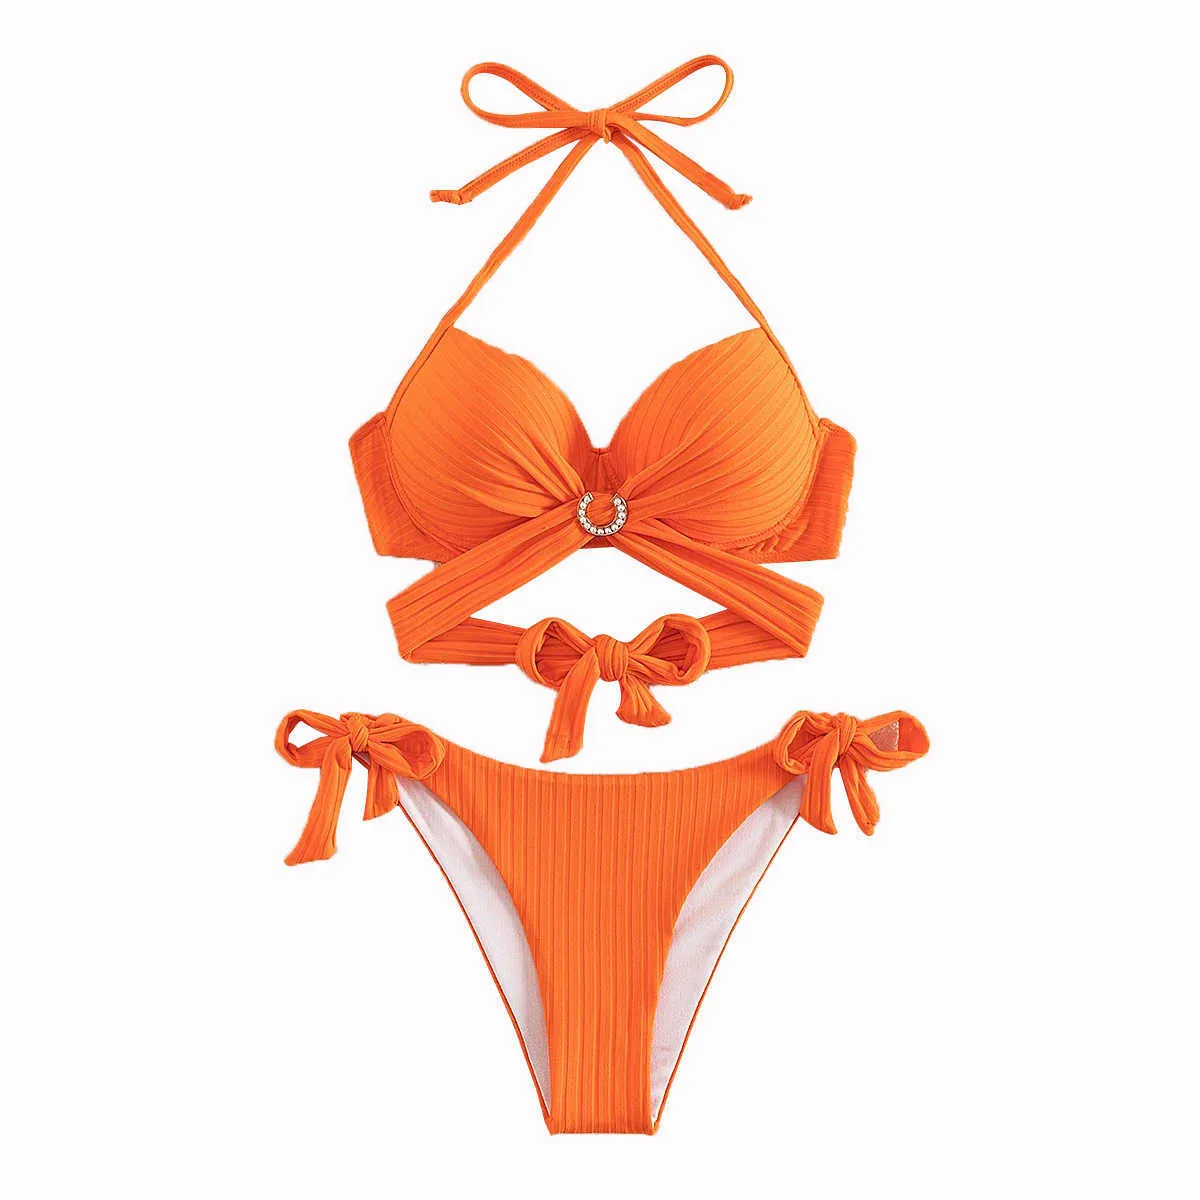 2023 Womens Sexy Push Up Halter Brazilian Bikini Set And Skirt For Small  Breasts Orange Bathing Suit Z0613 From Make07, $17.24